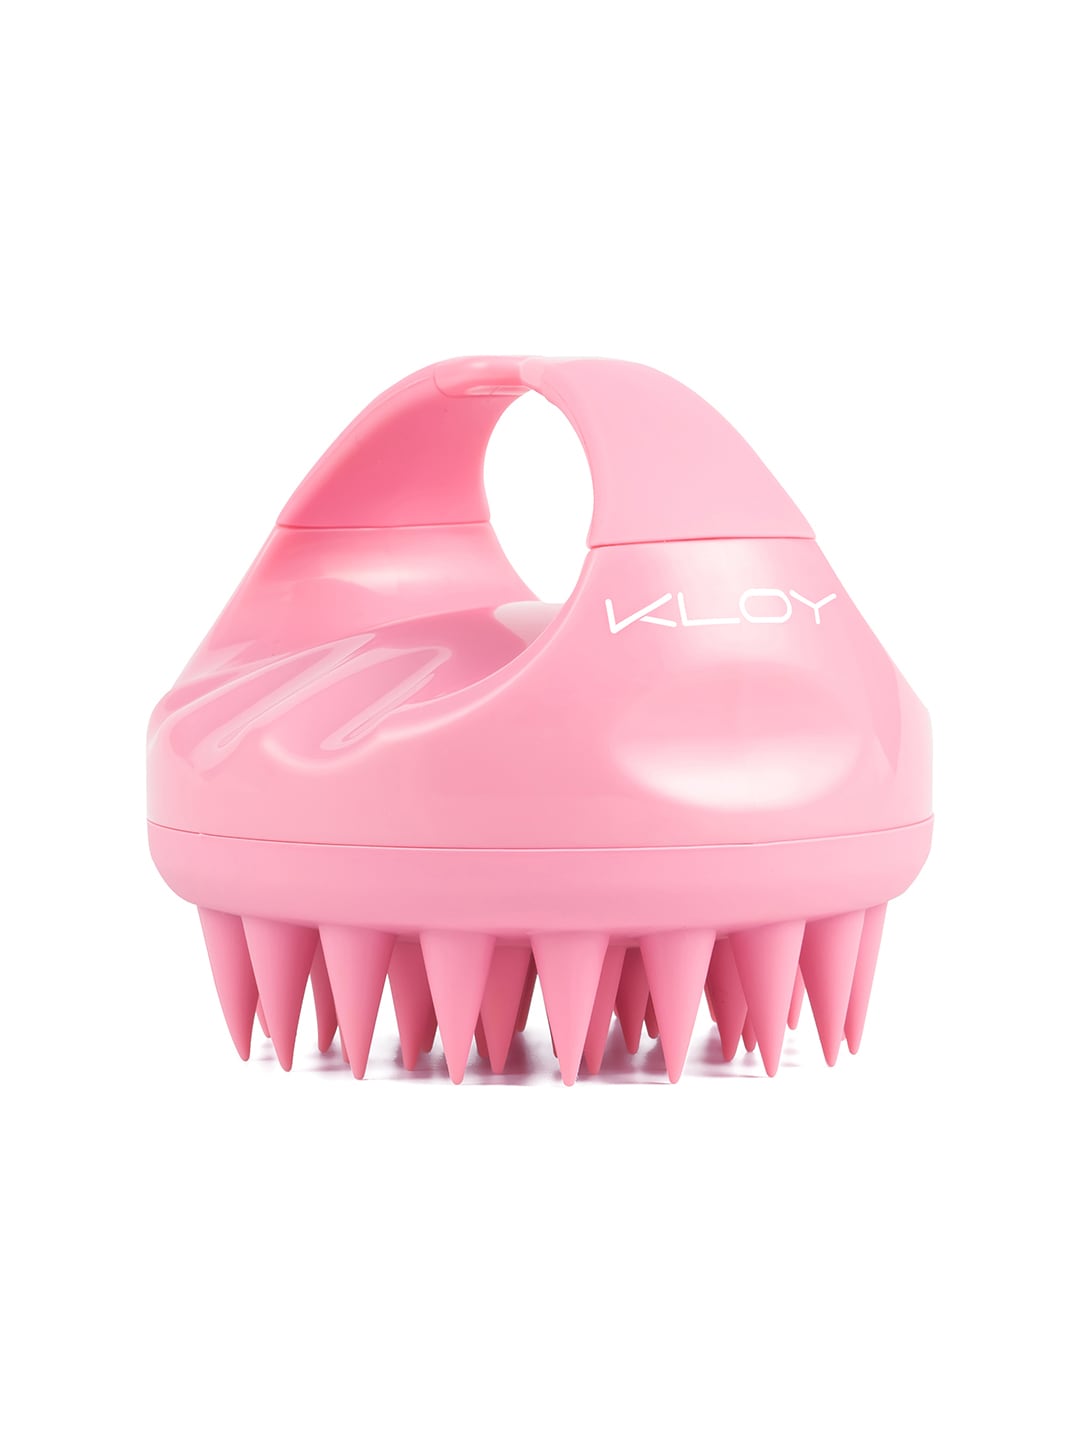 KLOY Pink Hair Scalp Massager Exfoliator Shampoo Brush with Soft Silicone Bristles Price in India